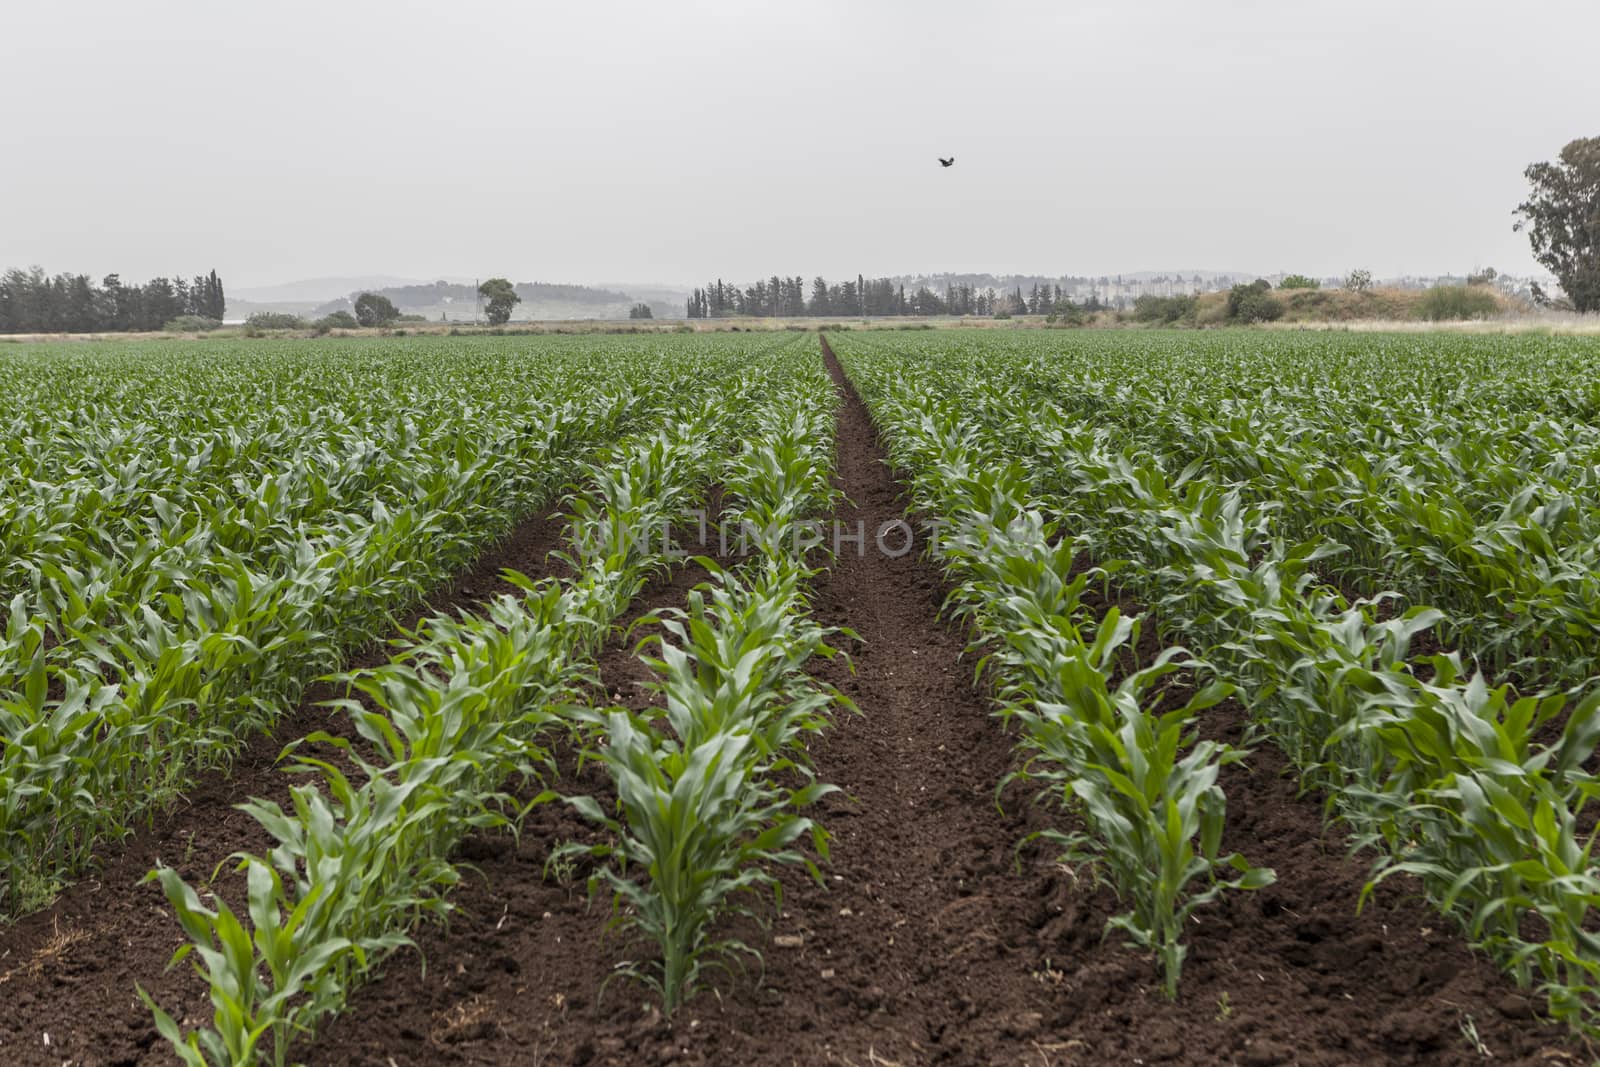 Agriculture and rural land with growing corn